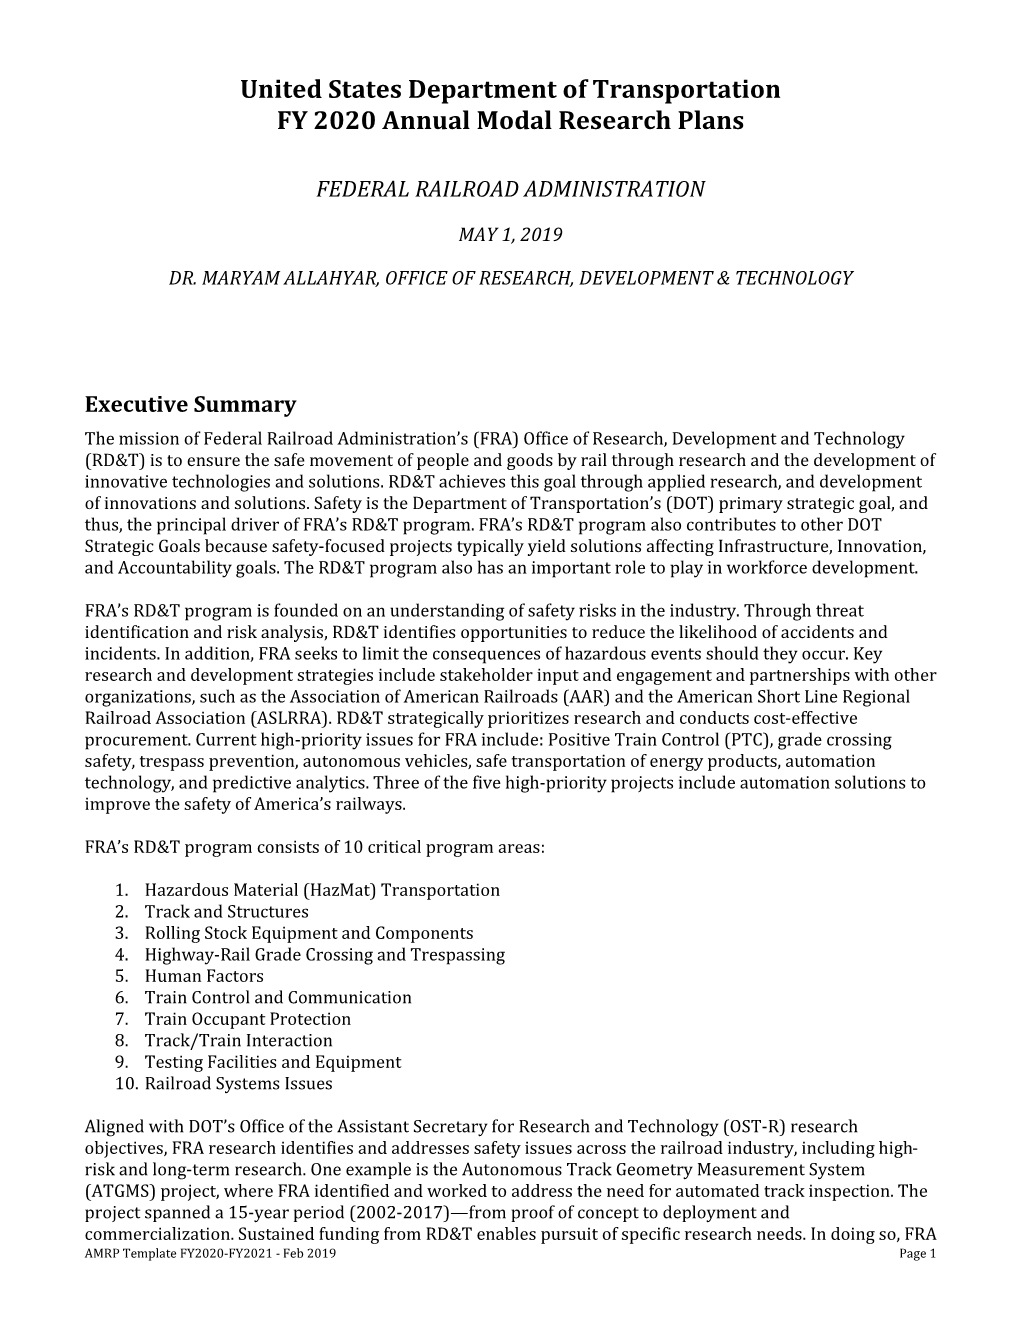 United States Department of Transportation FY 2020 Annual Modal Research Plans